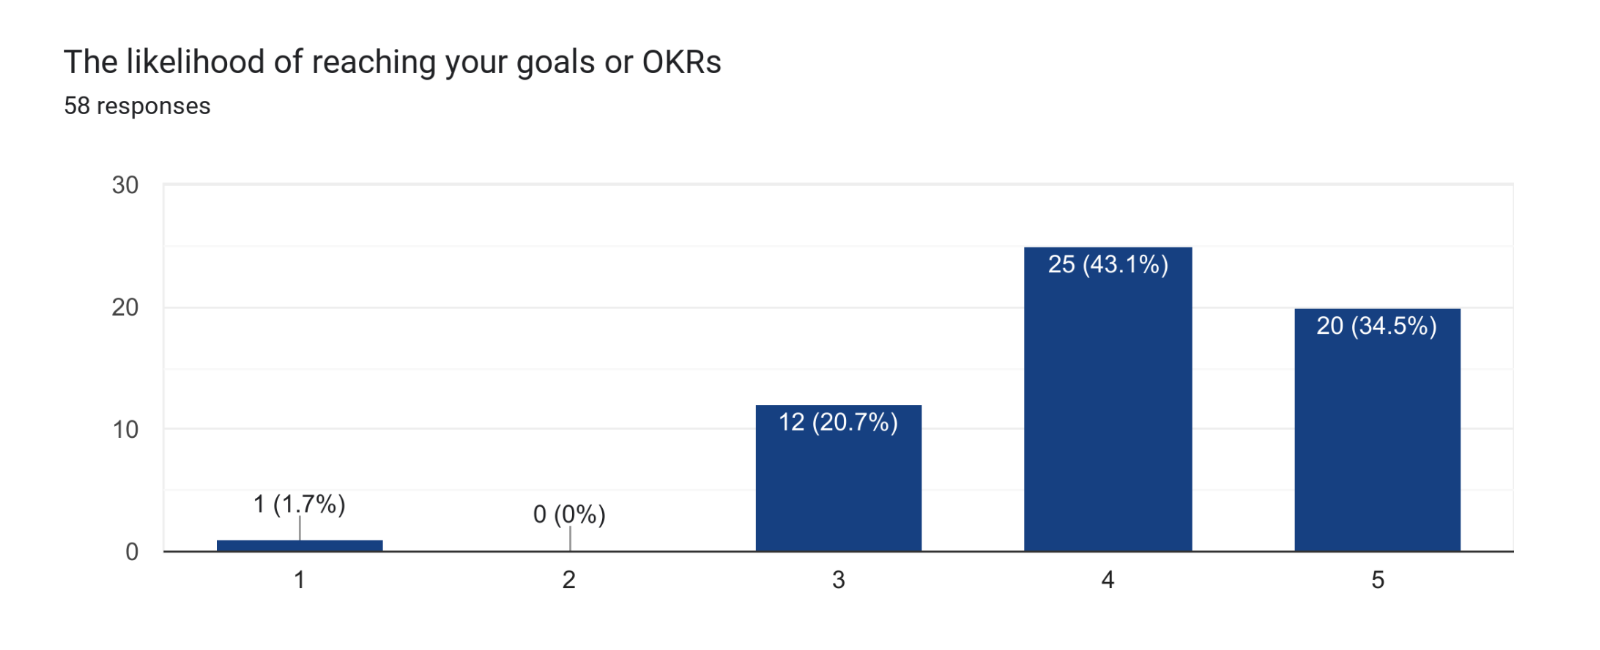 Bar graph titled “The likelihood of reaching your goals or OKRs” showing 58 responses on a scale of 1 to 5